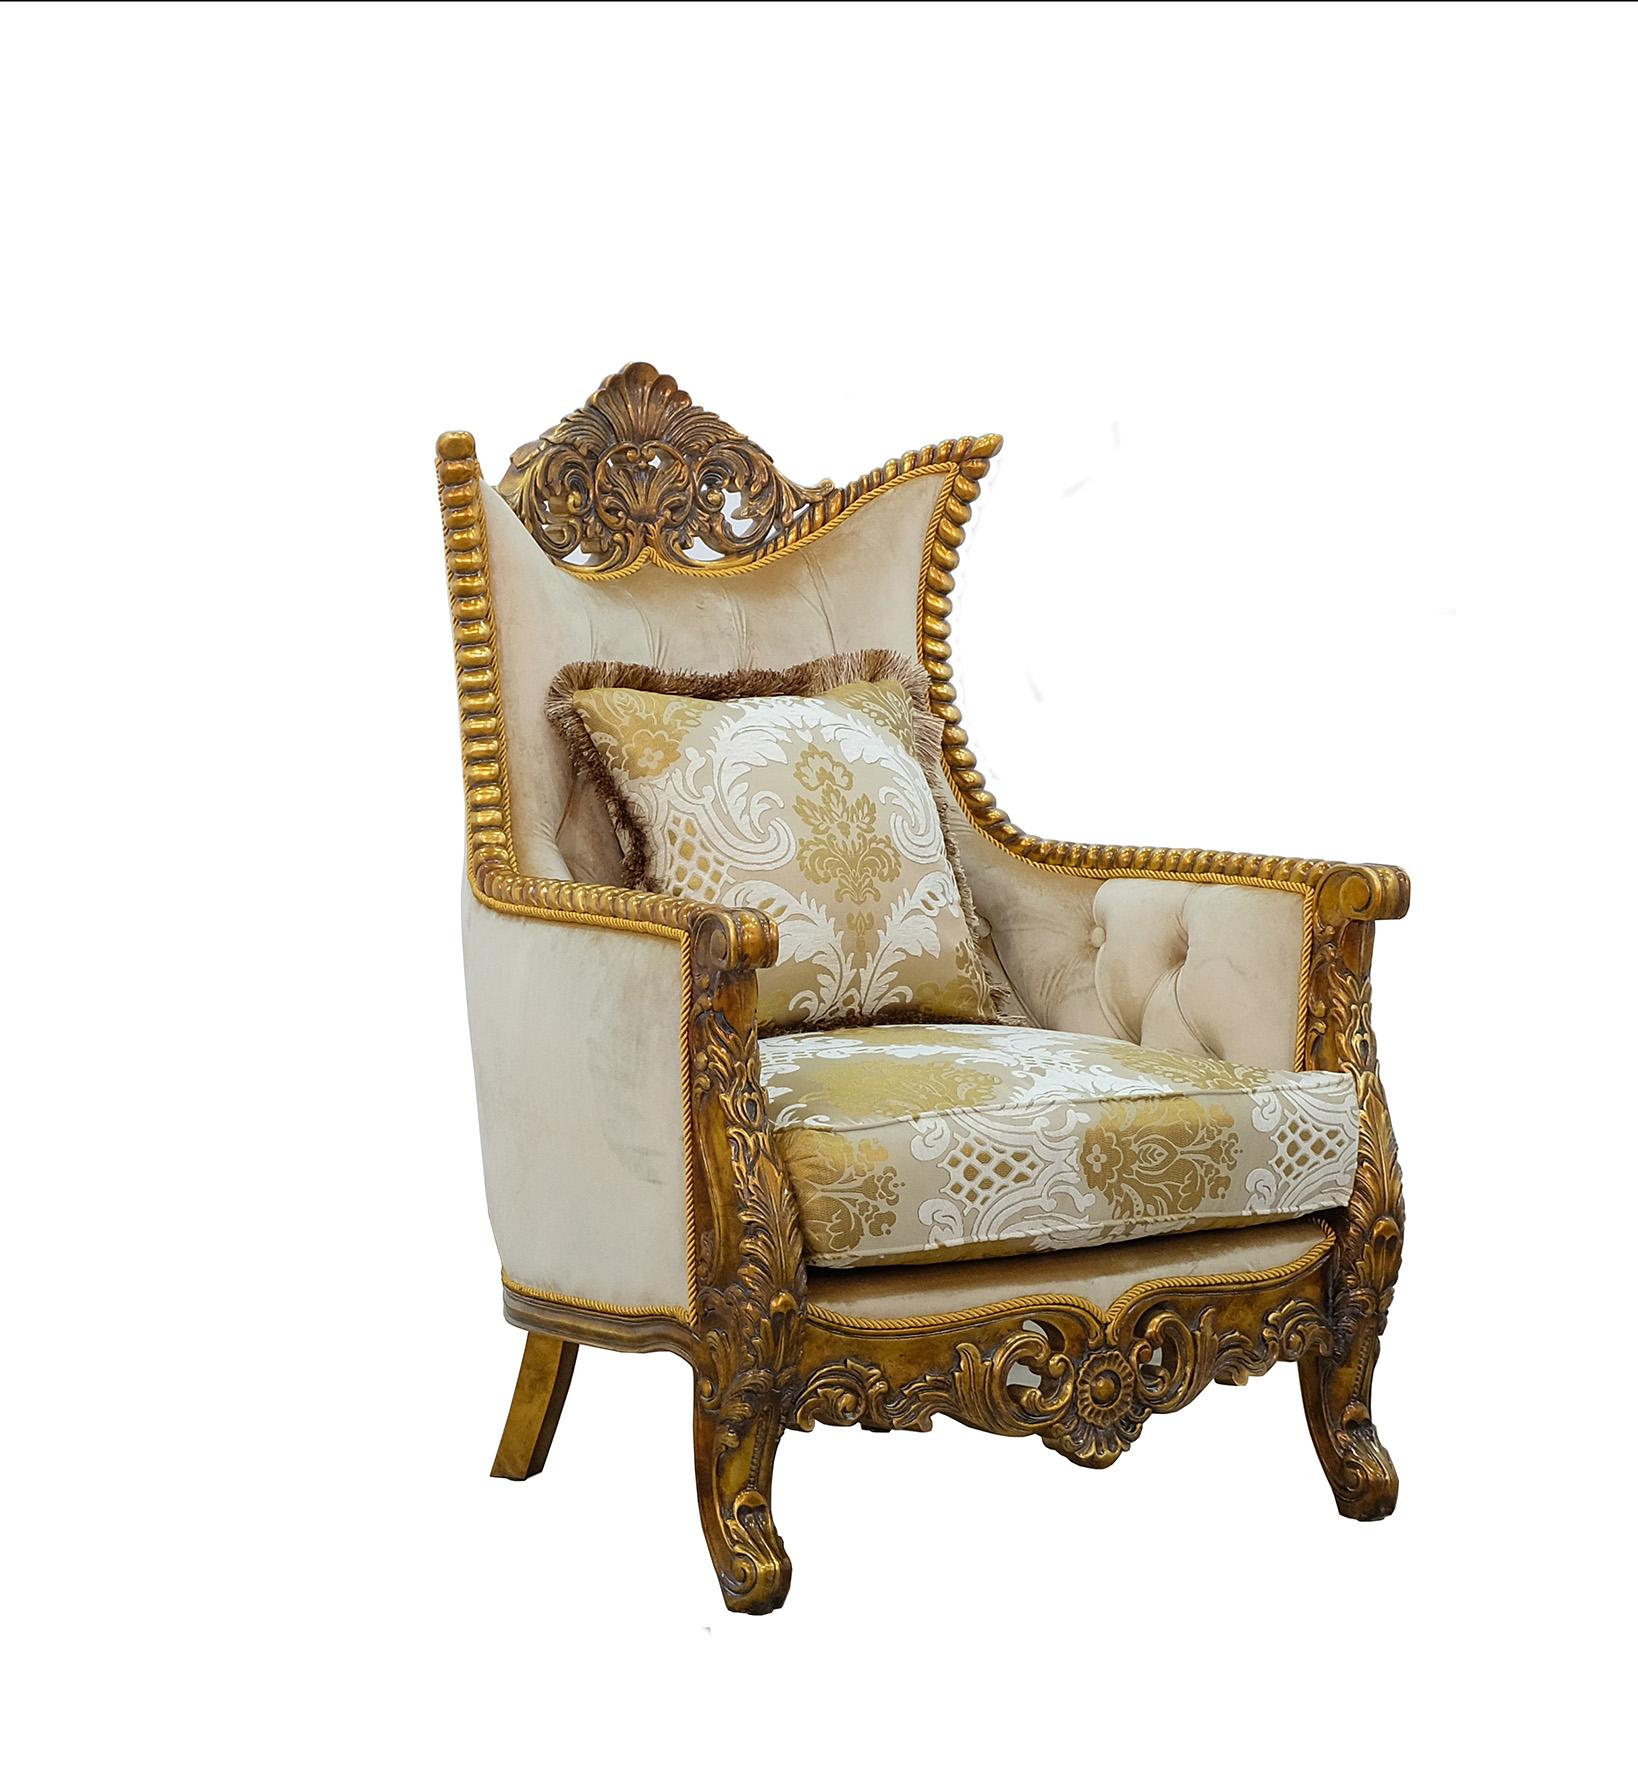 Classic, Traditional Arm Chair MAGGIOLINI 31055-C in Antique, Gold, Beige Fabric